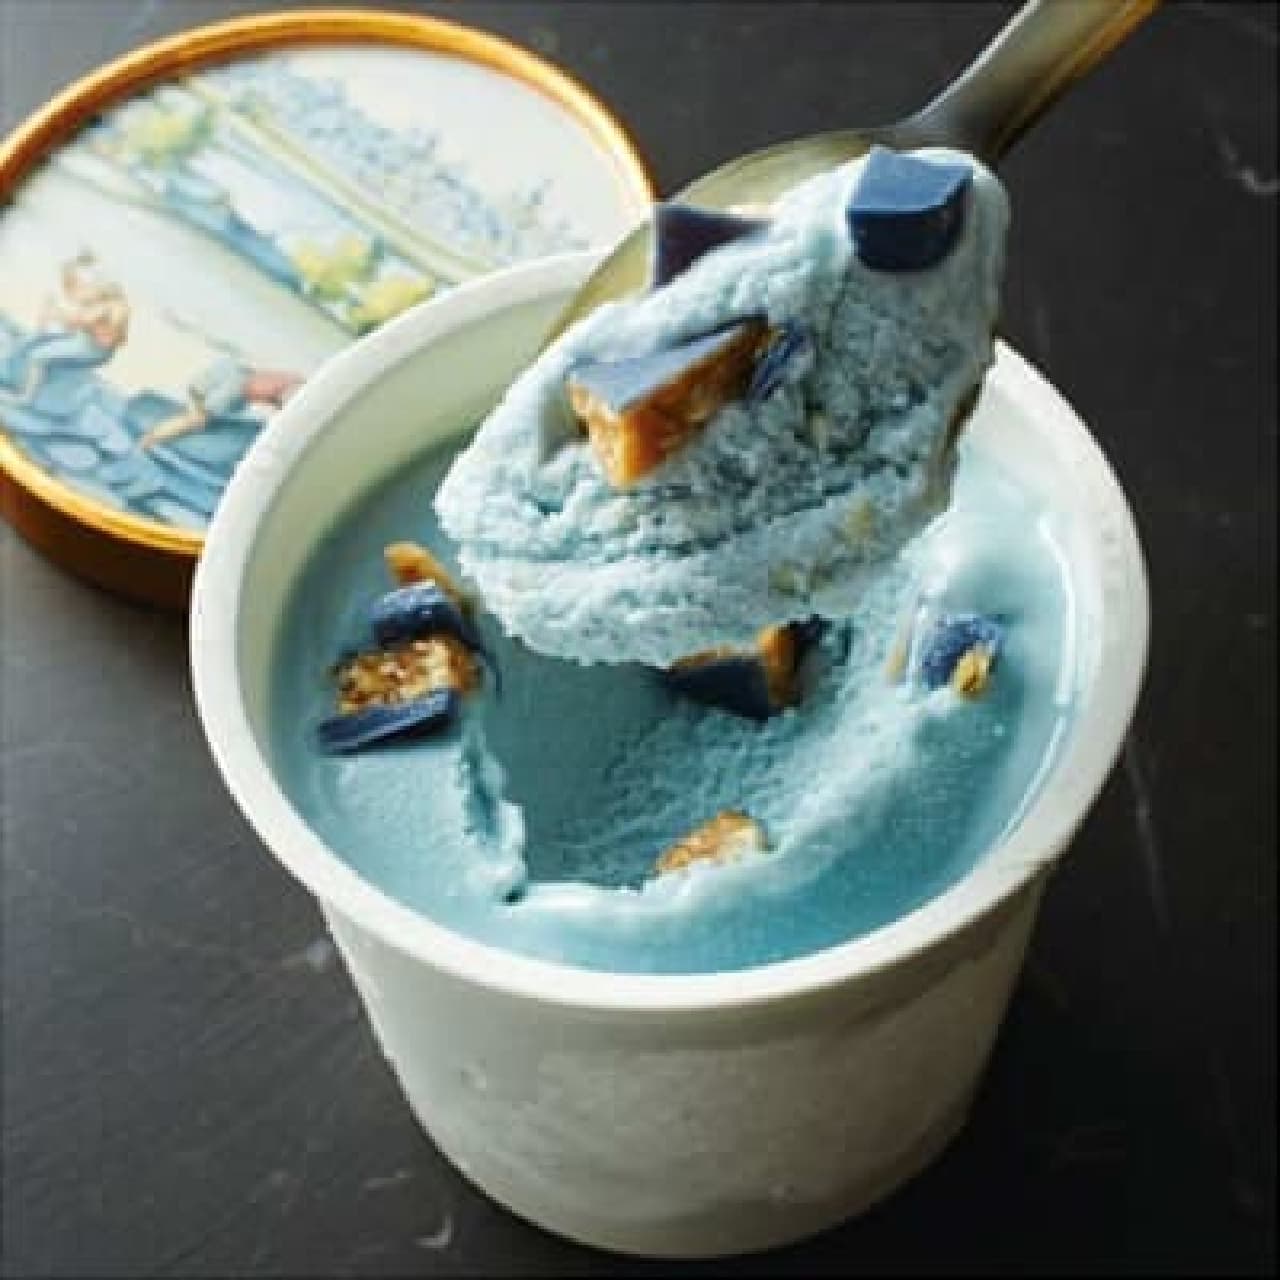 "Blue chocolate" becomes a summer gelato